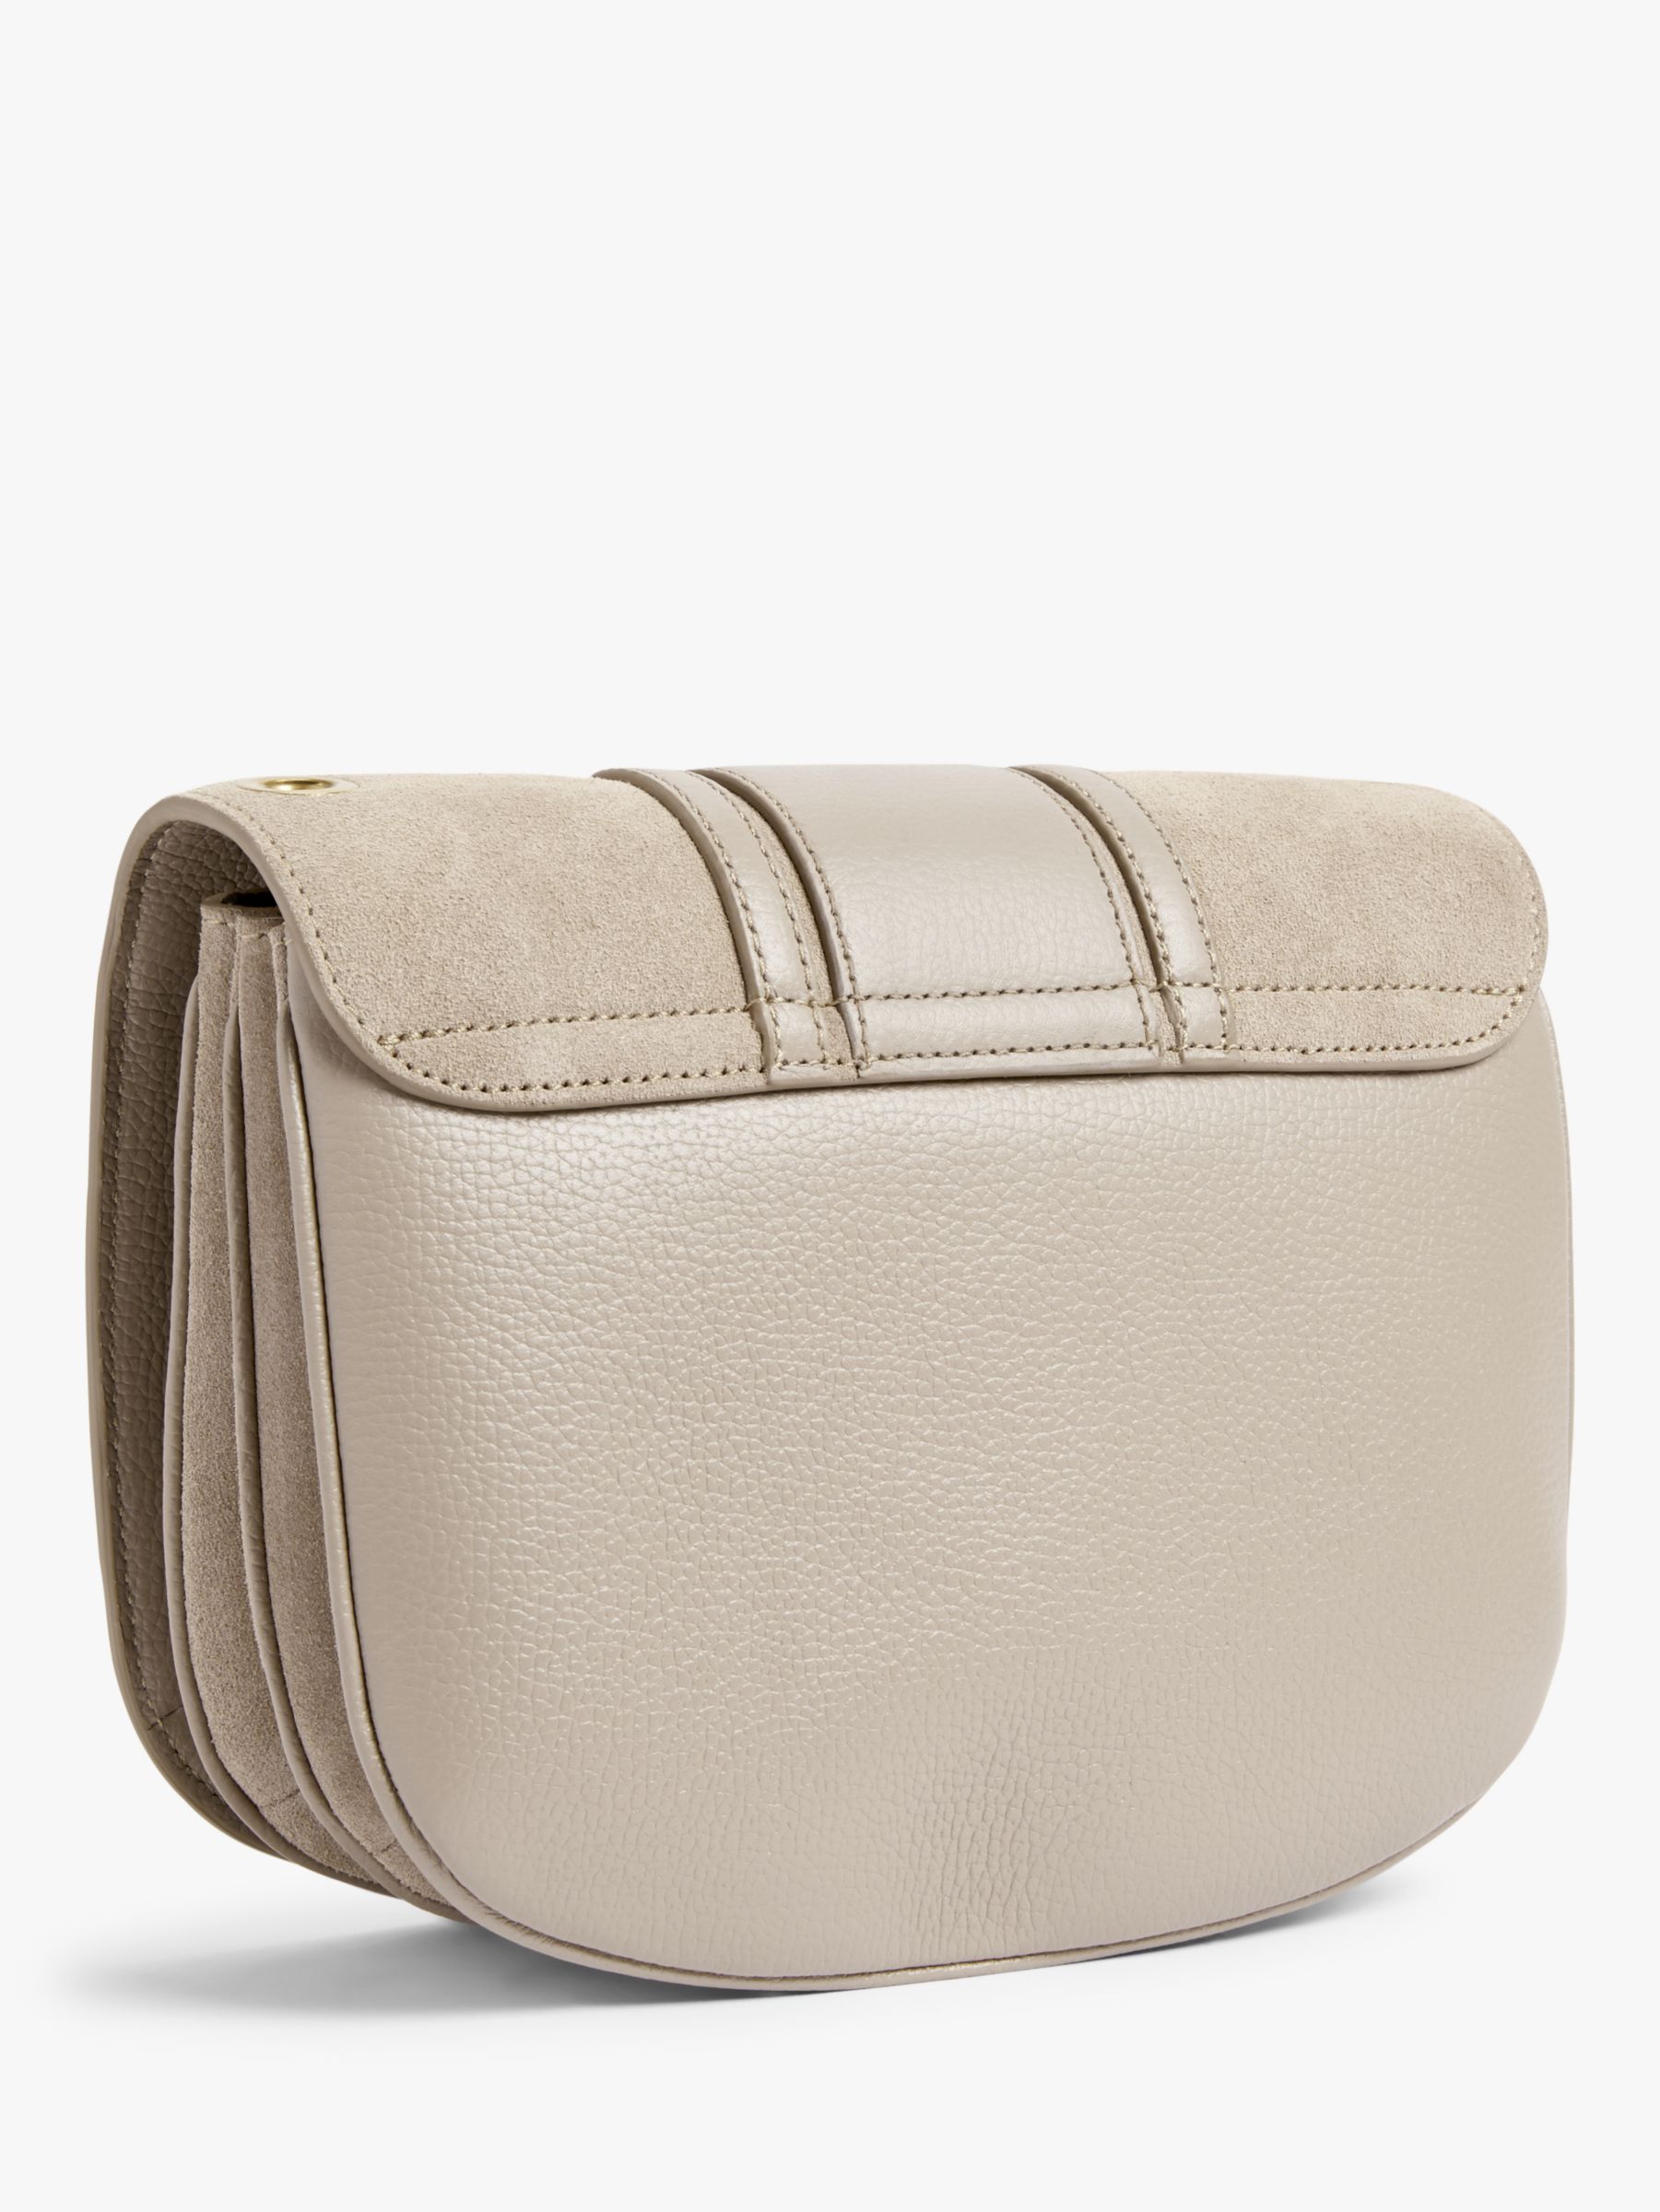 Buy See By Chloé Small Hana Suede Leather Satchel Bag Online at johnlewis.com